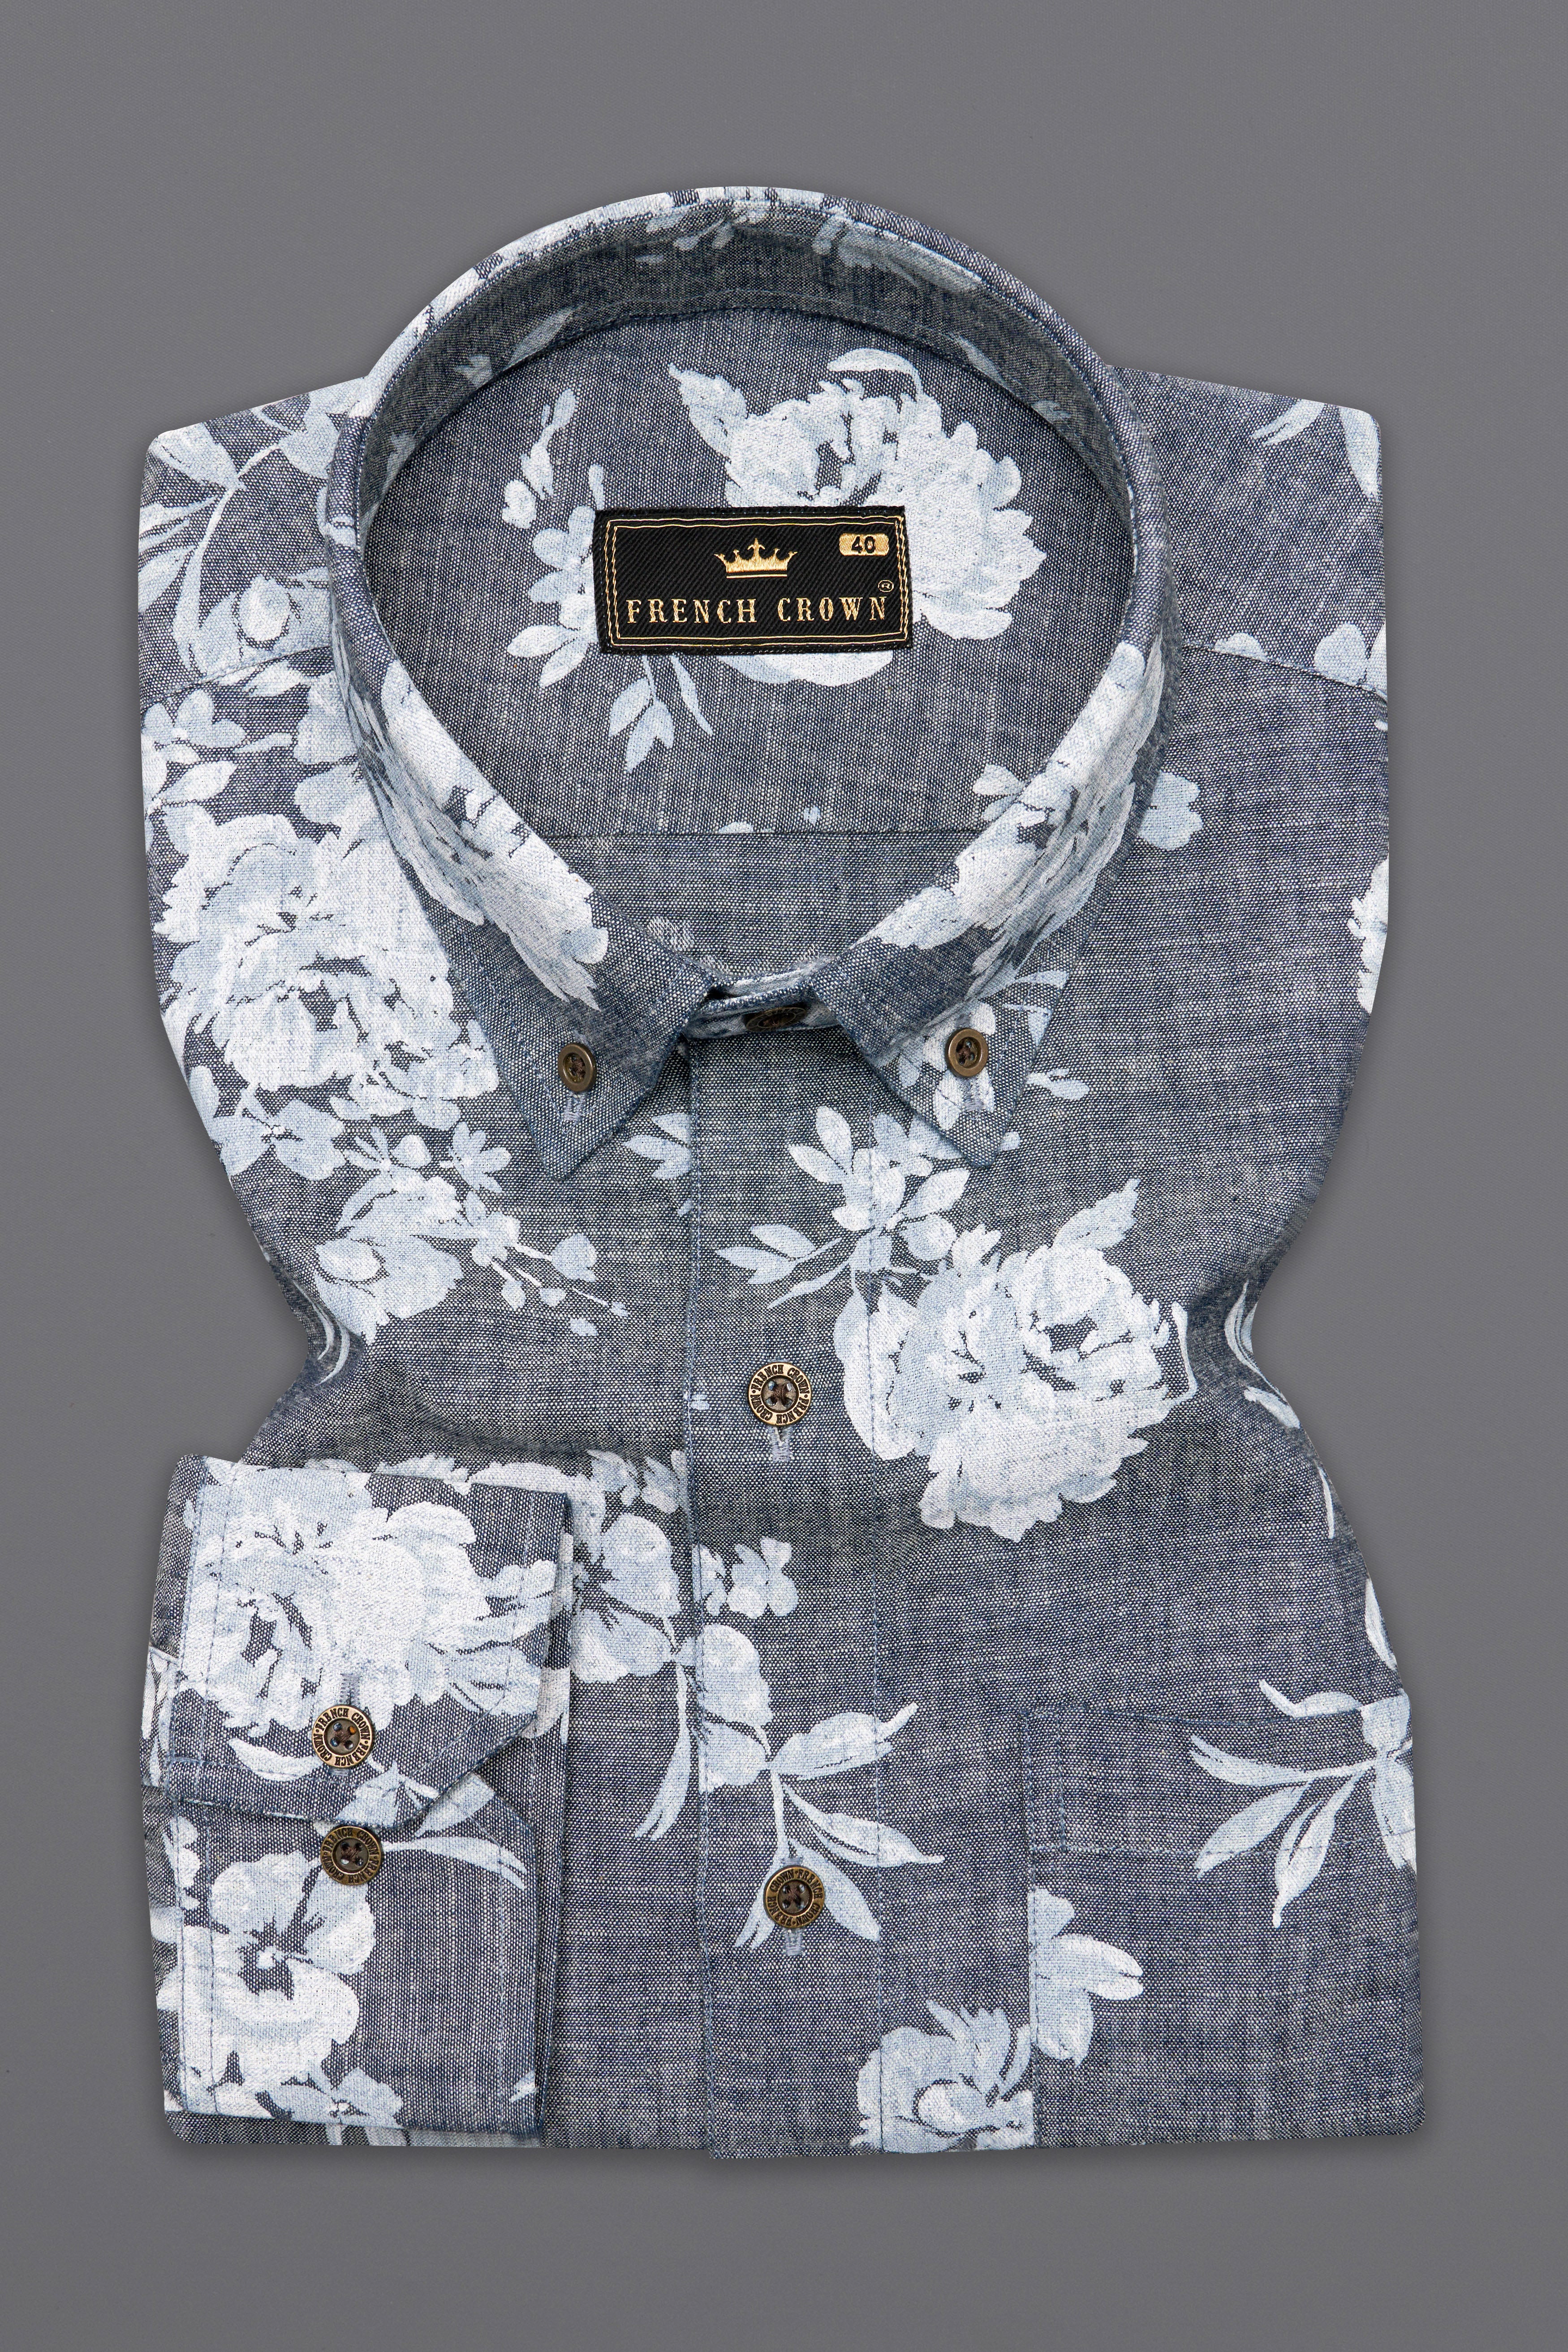 Nevada with Languid Gray Floral Textured Denim Shirt 10146-BD-MB-38, 10146-BD-MB-H-38, 10146-BD-MB-39, 10146-BD-MB-H-39, 10146-BD-MB-40, 10146-BD-MB-H-40, 10146-BD-MB-42, 10146-BD-MB-H-42, 10146-BD-MB-44, 10146-BD-MB-H-44, 10146-BD-MB-46, 10146-BD-MB-H-46, 10146-BD-MB-48, 10146-BD-MB-H-48, 10146-BD-MB-50, 10146-BD-MB-H-50, 10146-BD-MB-52, 10146-BD-MB-H-52